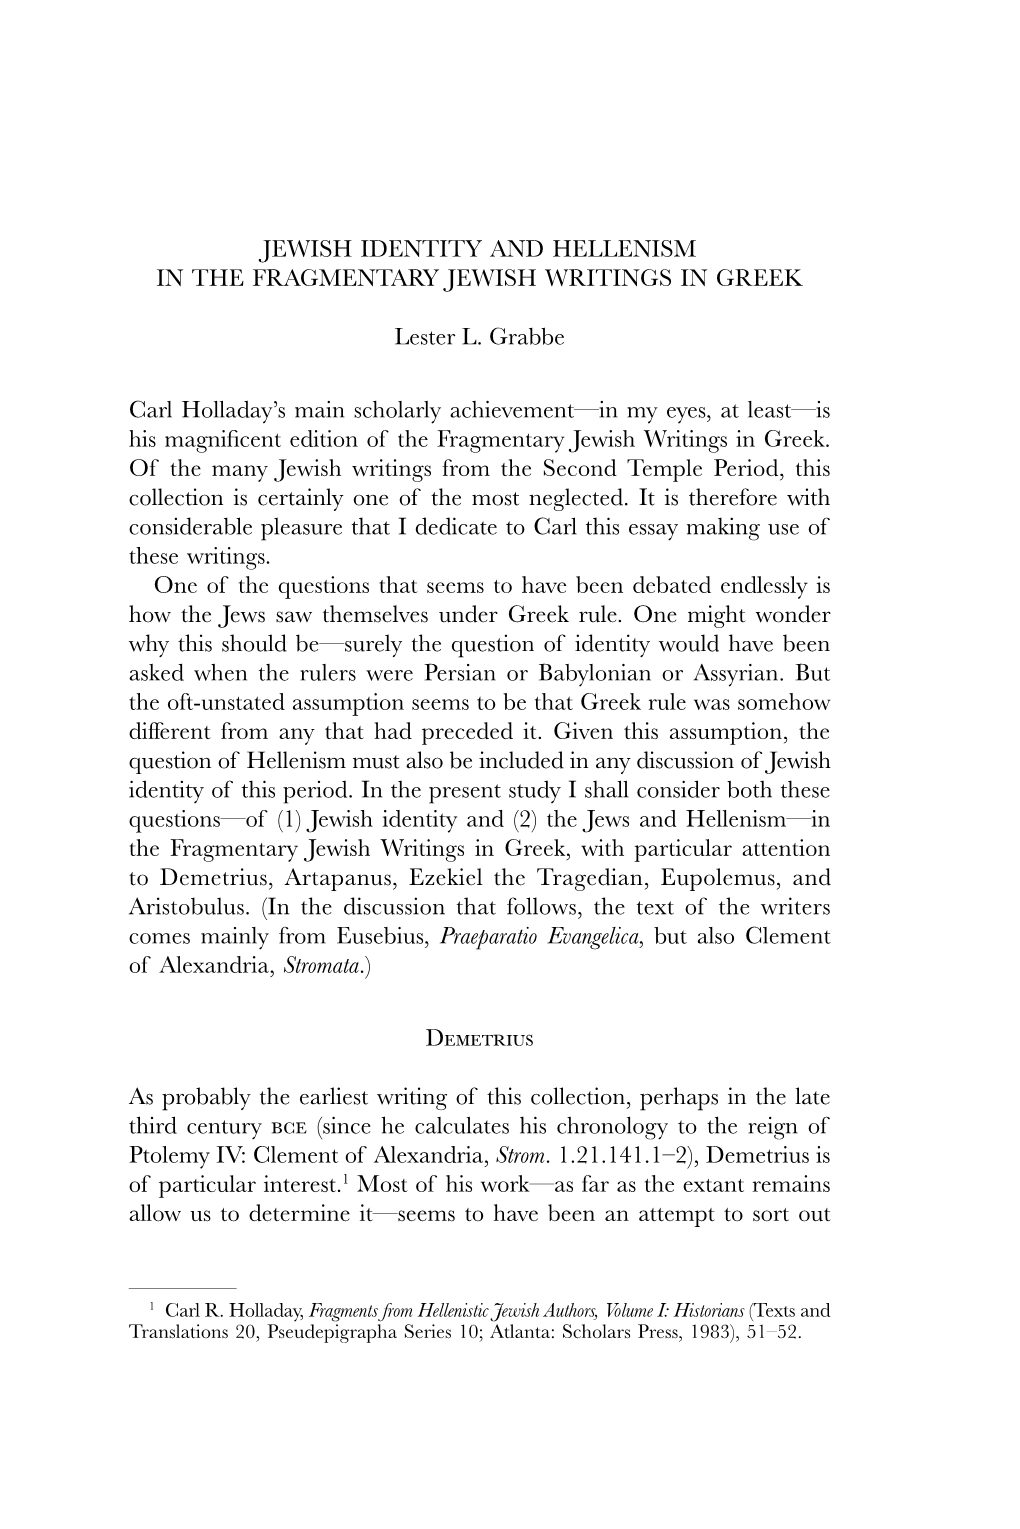 Jewish Identity and Hellenism in the Fragmentary Jewish Writings in Greek